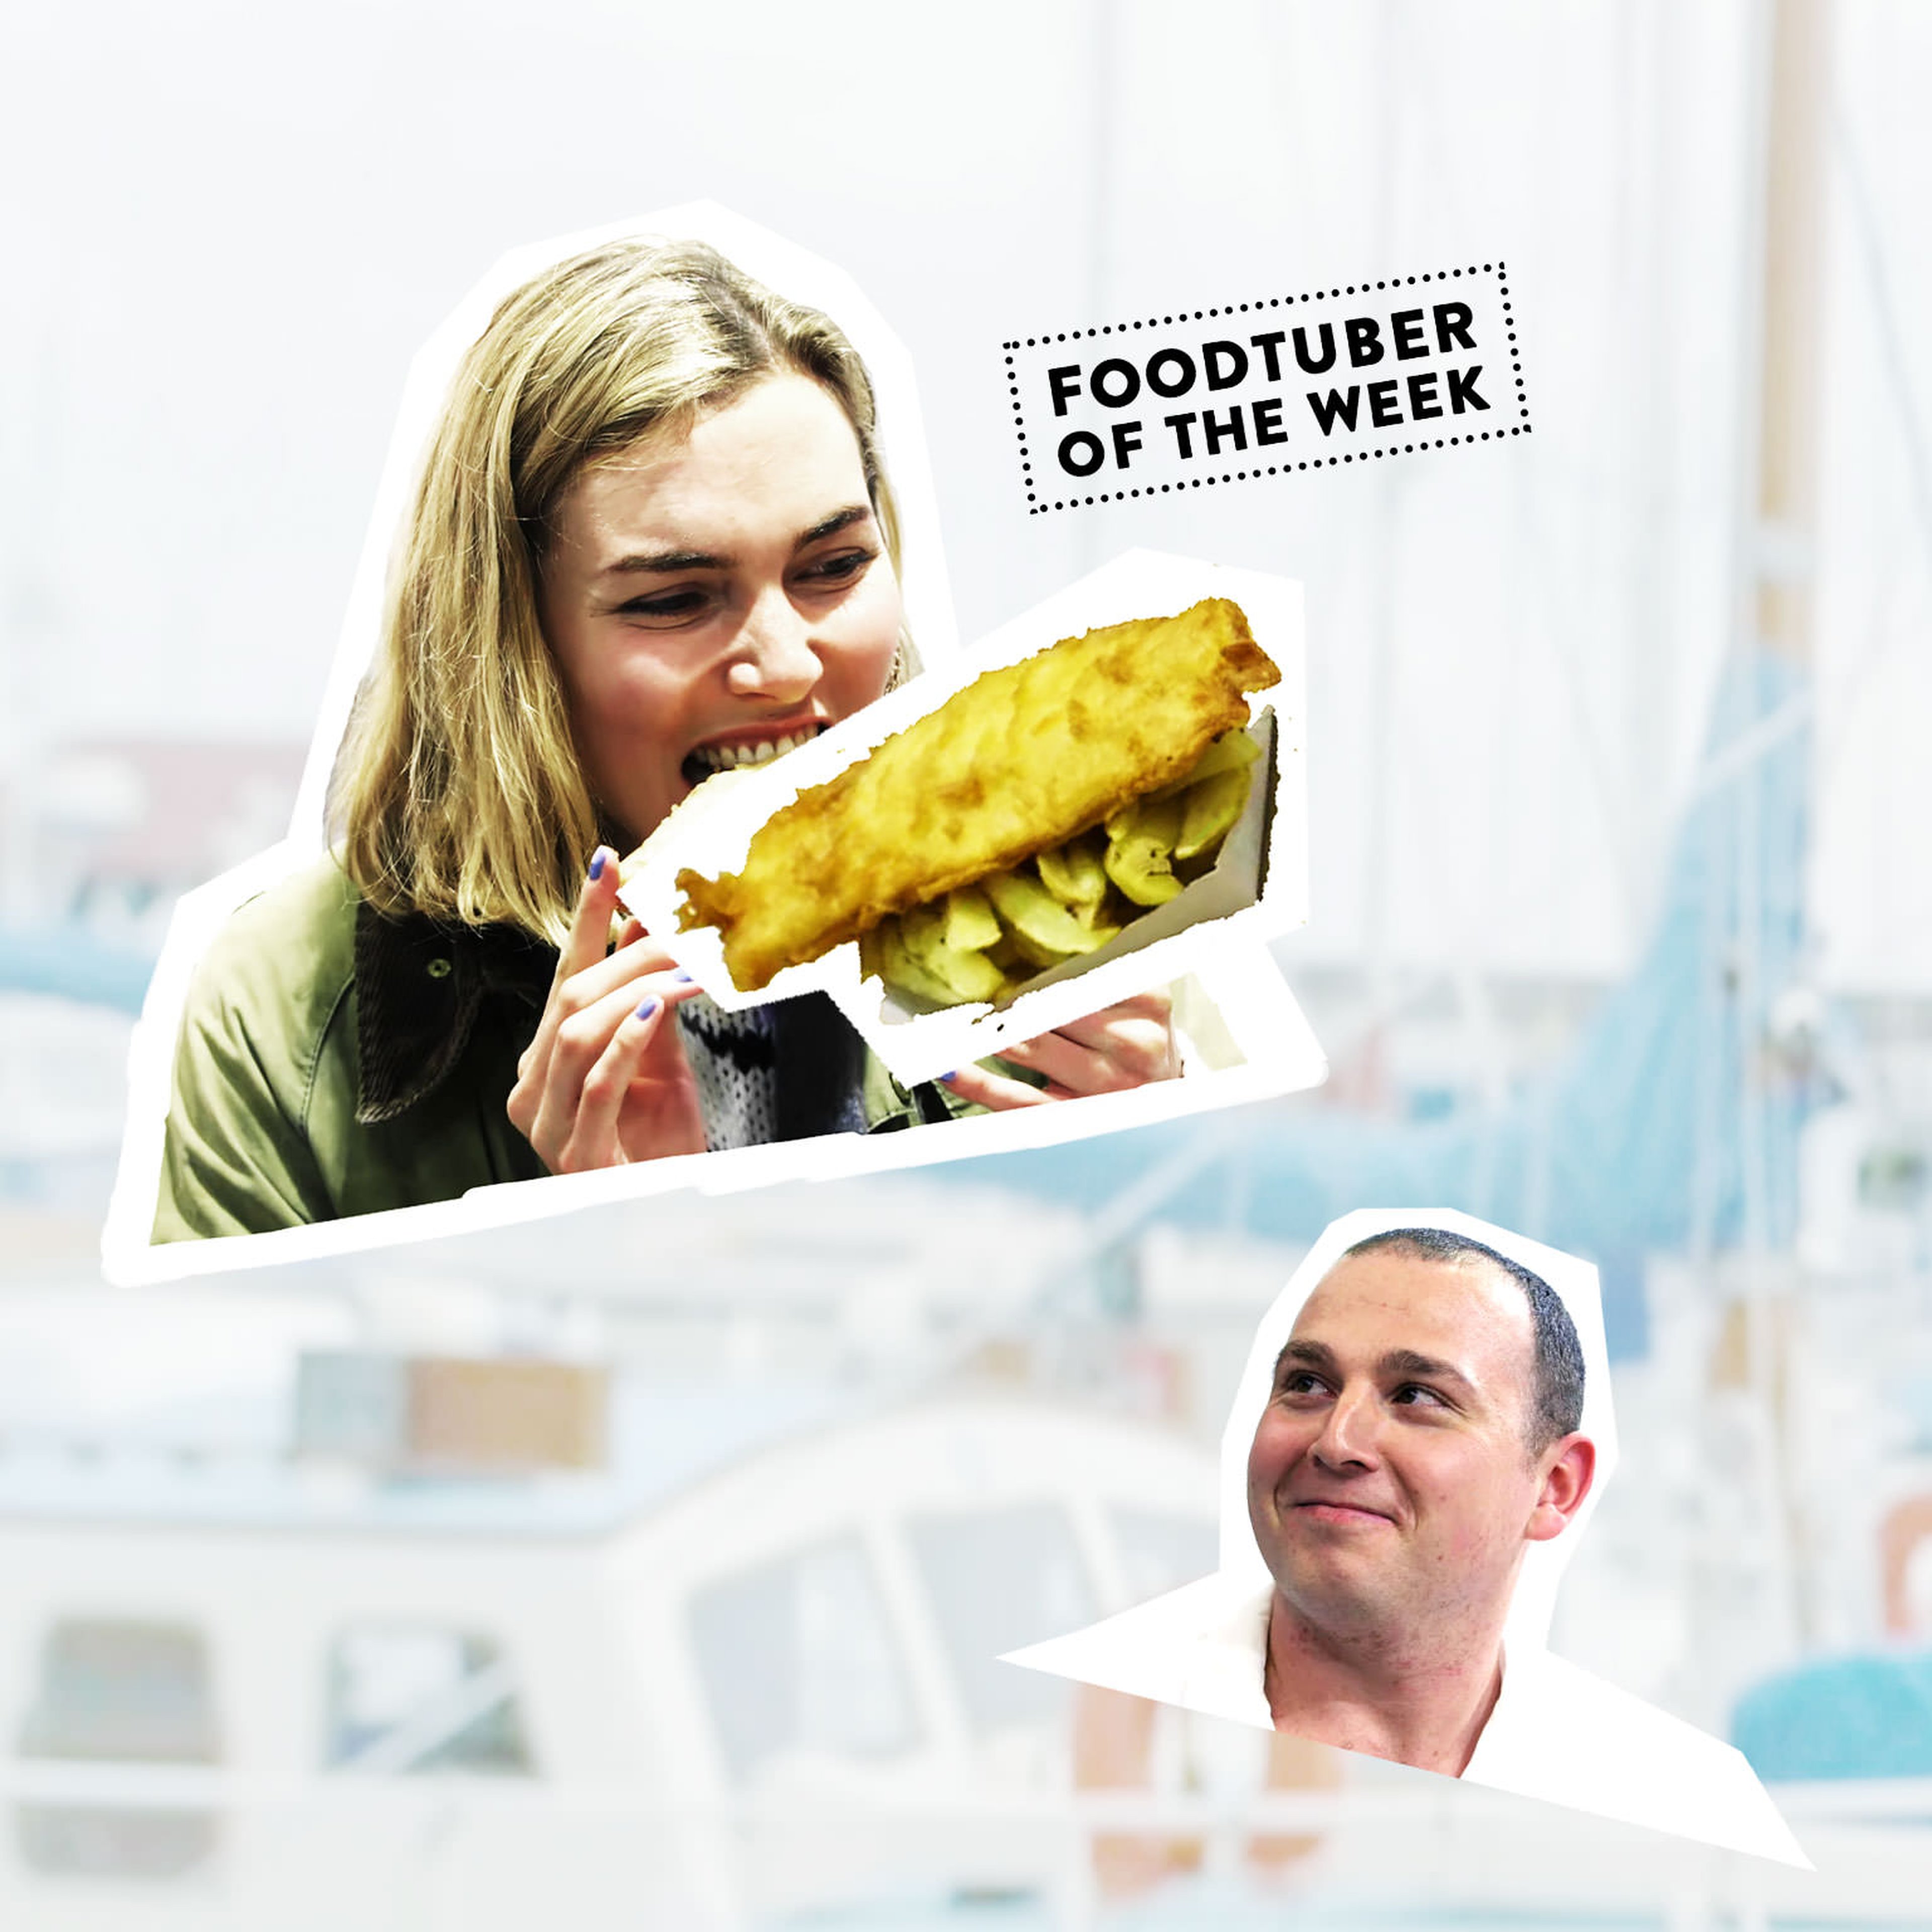 This week Munchies shows us the best Fish ’n’ Chips in the world